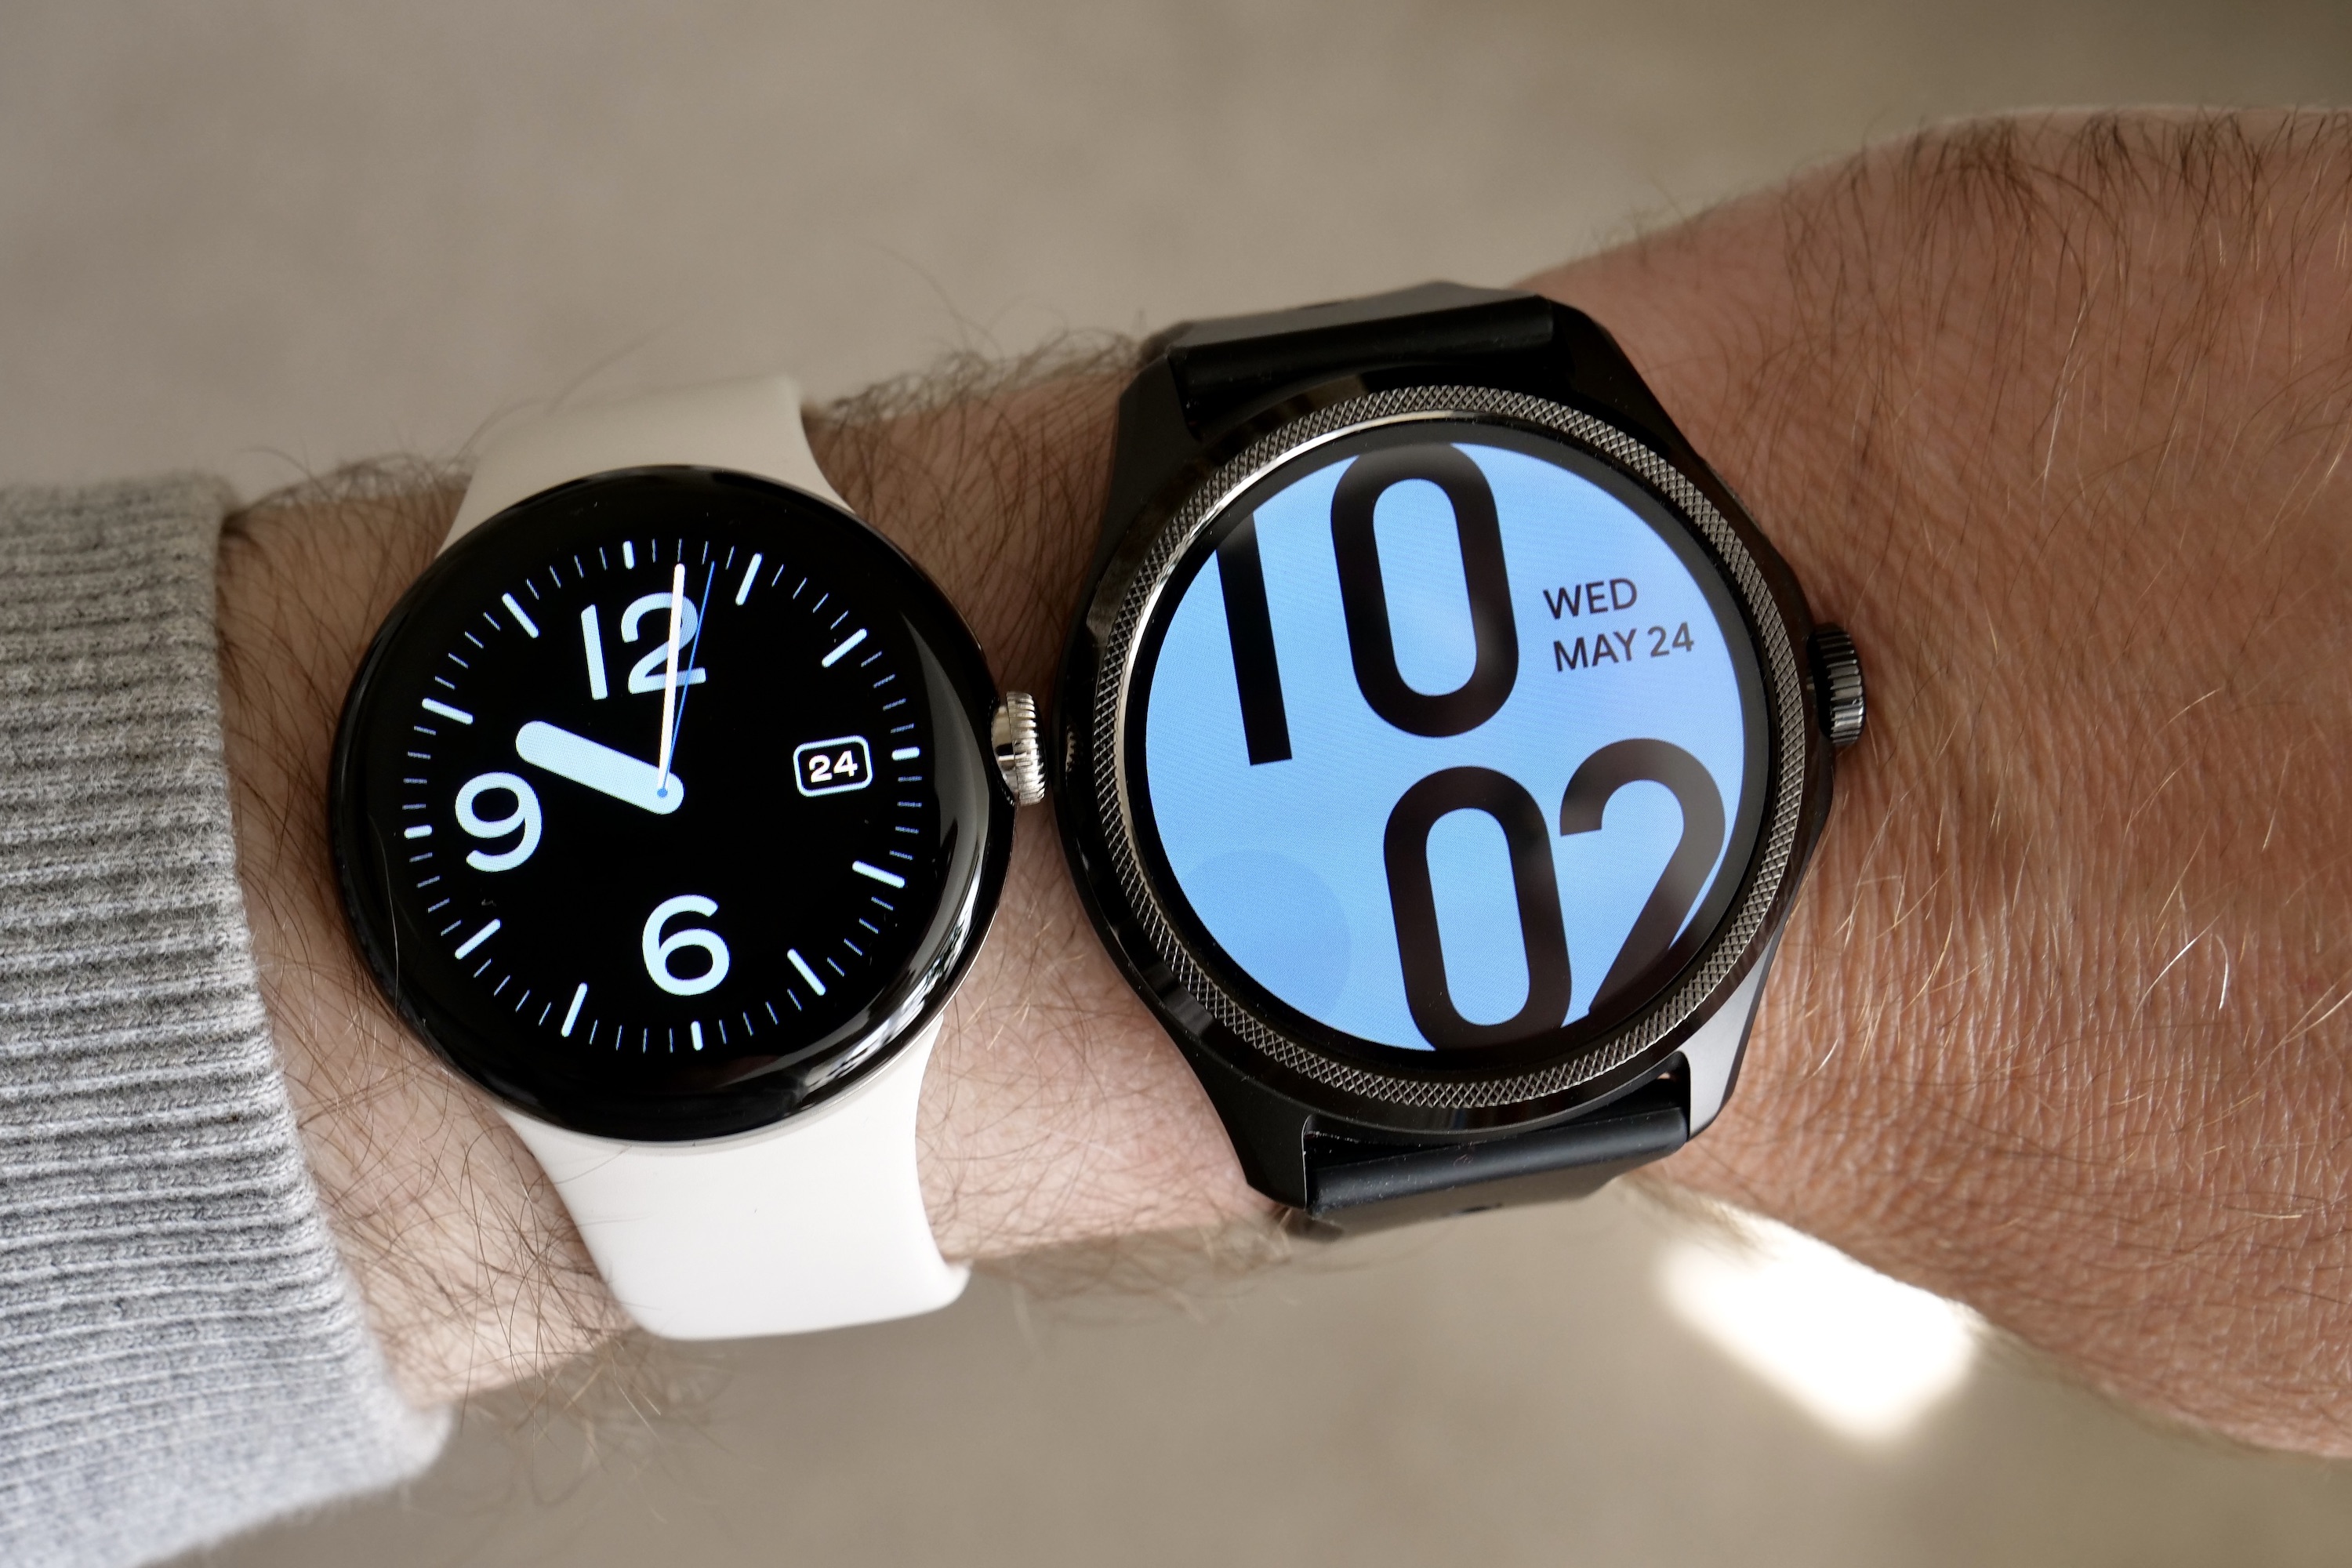 A Pixel Watch and TicWatch Pro 5 side-by-side on a person's wrist.